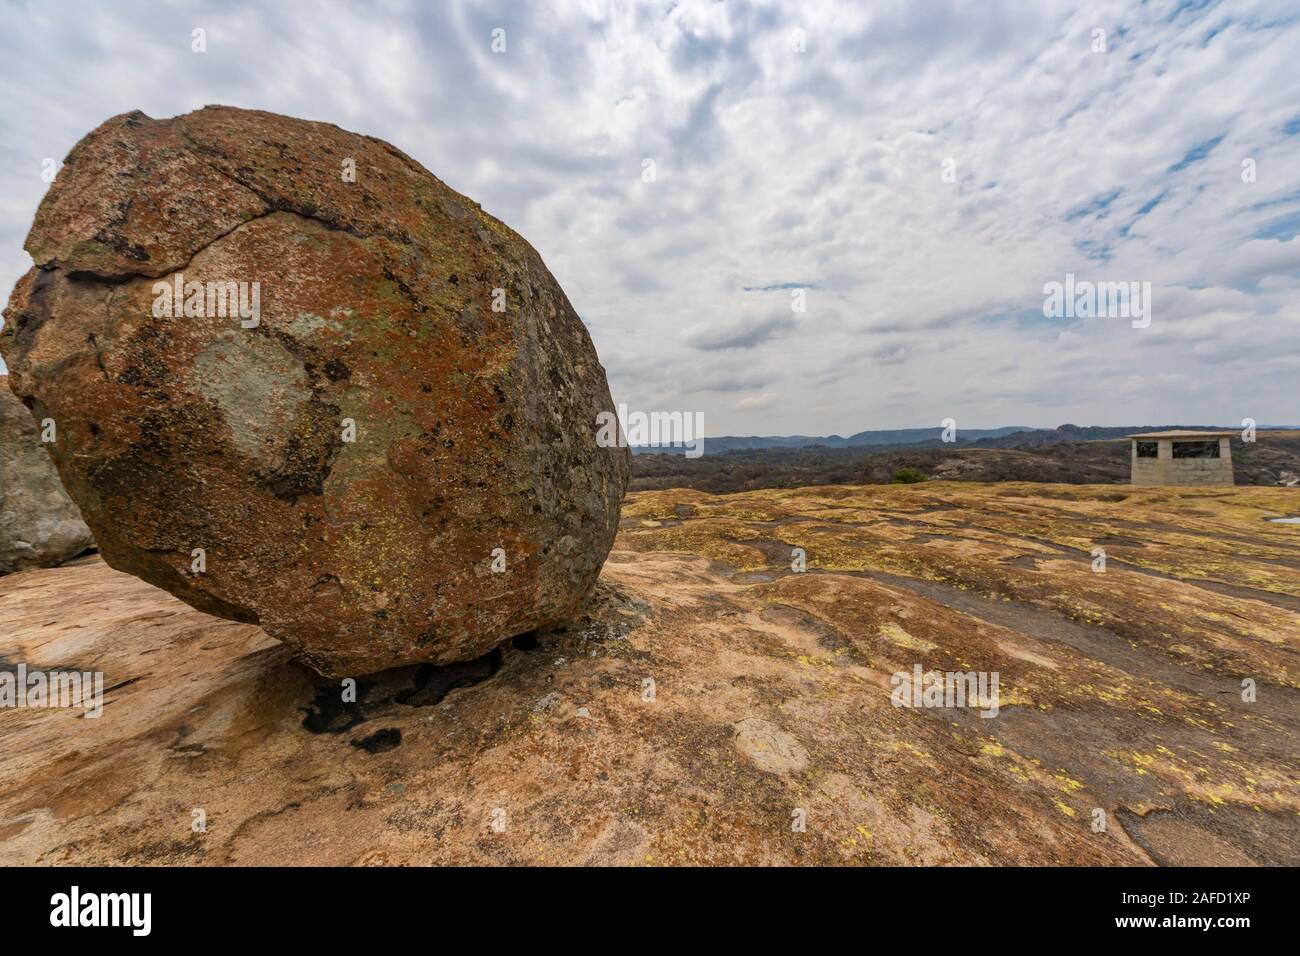 Matobo Hills (formerly Matopos) national park, Zimbabwe. The memorial of Captain Alan Wilson's "Lost patrol" which perished in the 1893 Matabele war, as seen from the Grave of Cecil Rhodes. Stock Photo